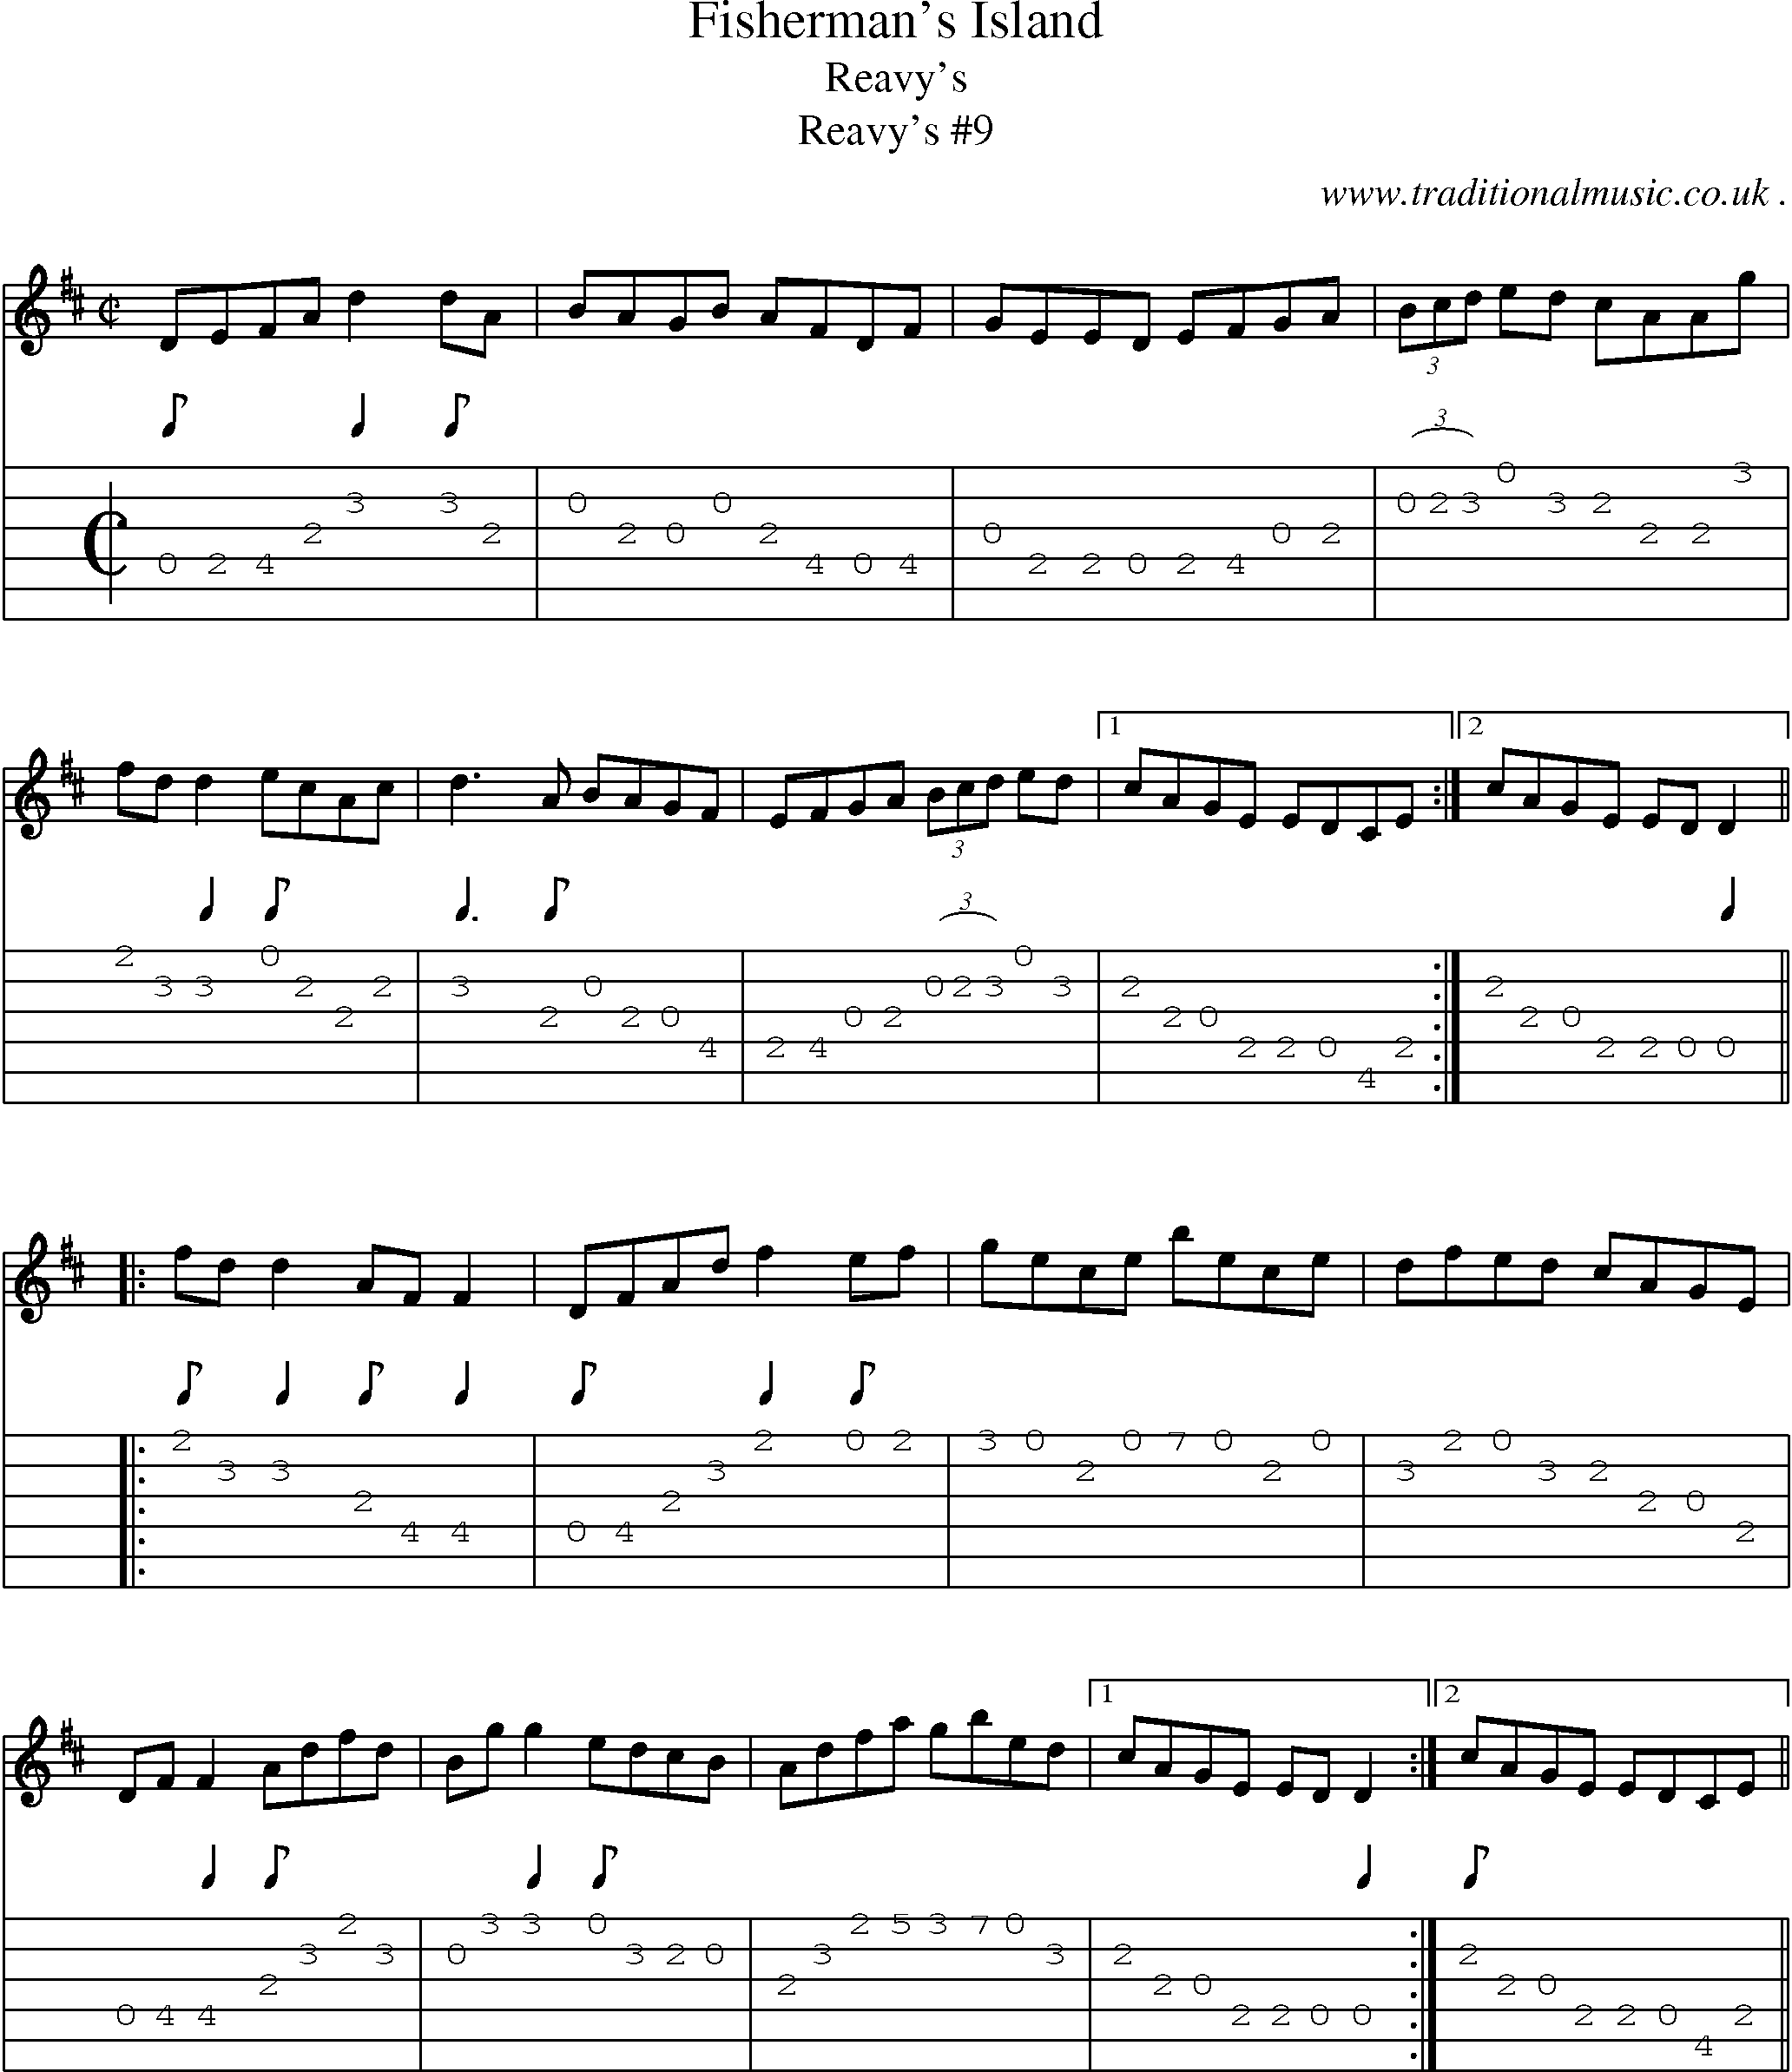 Sheet-Music and Guitar Tabs for Fishermans Island